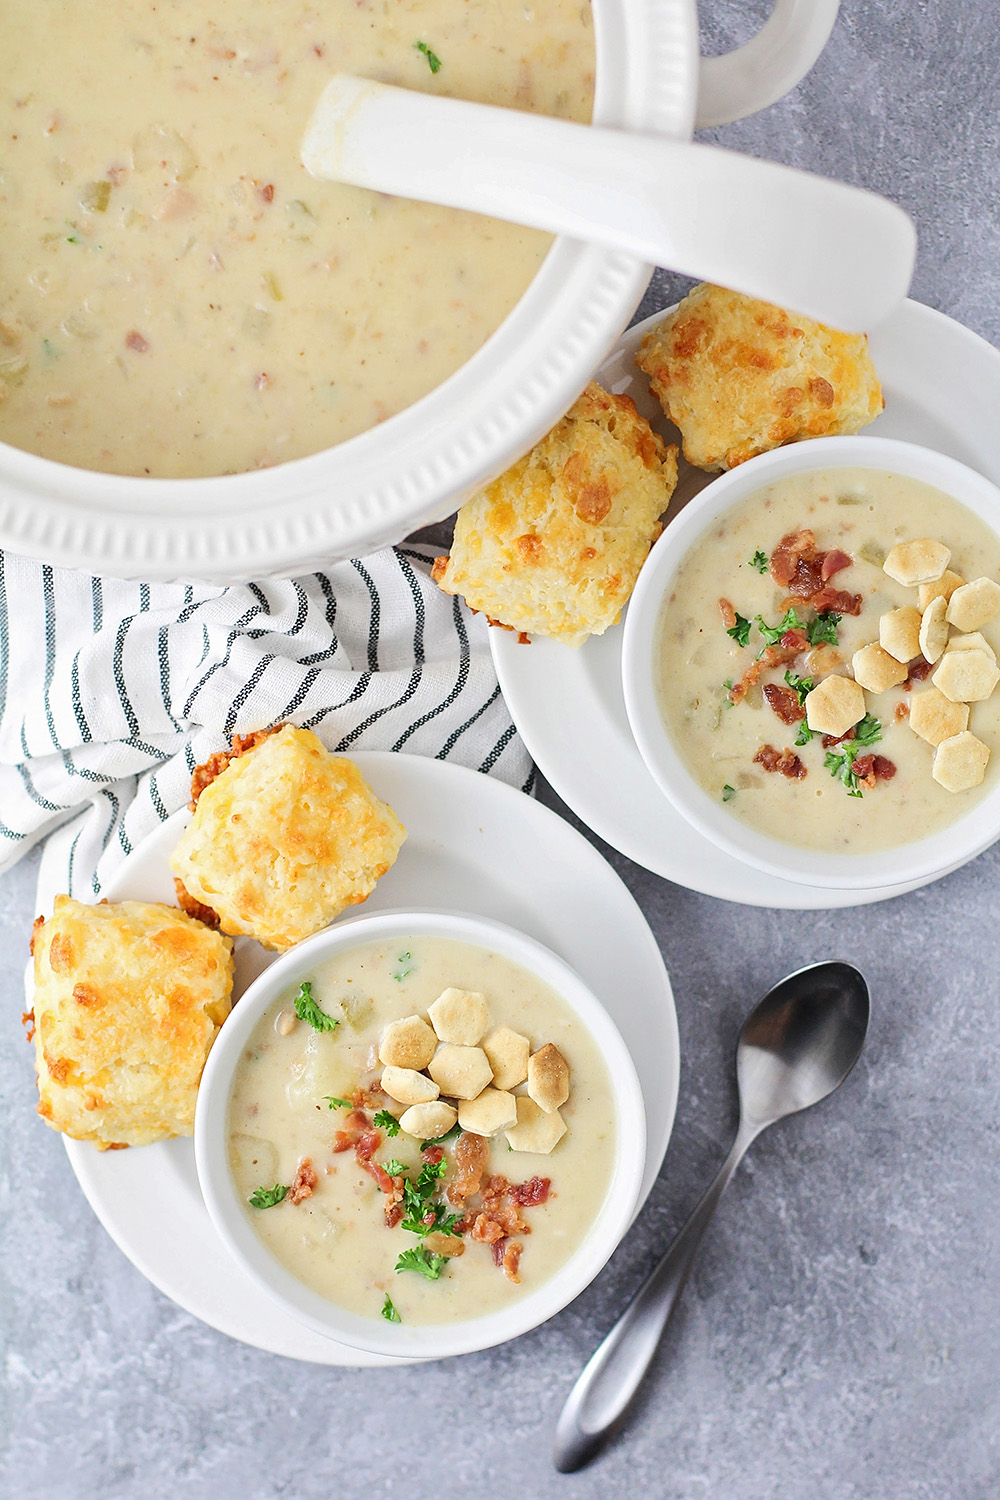 This instant pot clam chowder is so thick and creamy, and full of flavor! It's totally delicious comfort food!